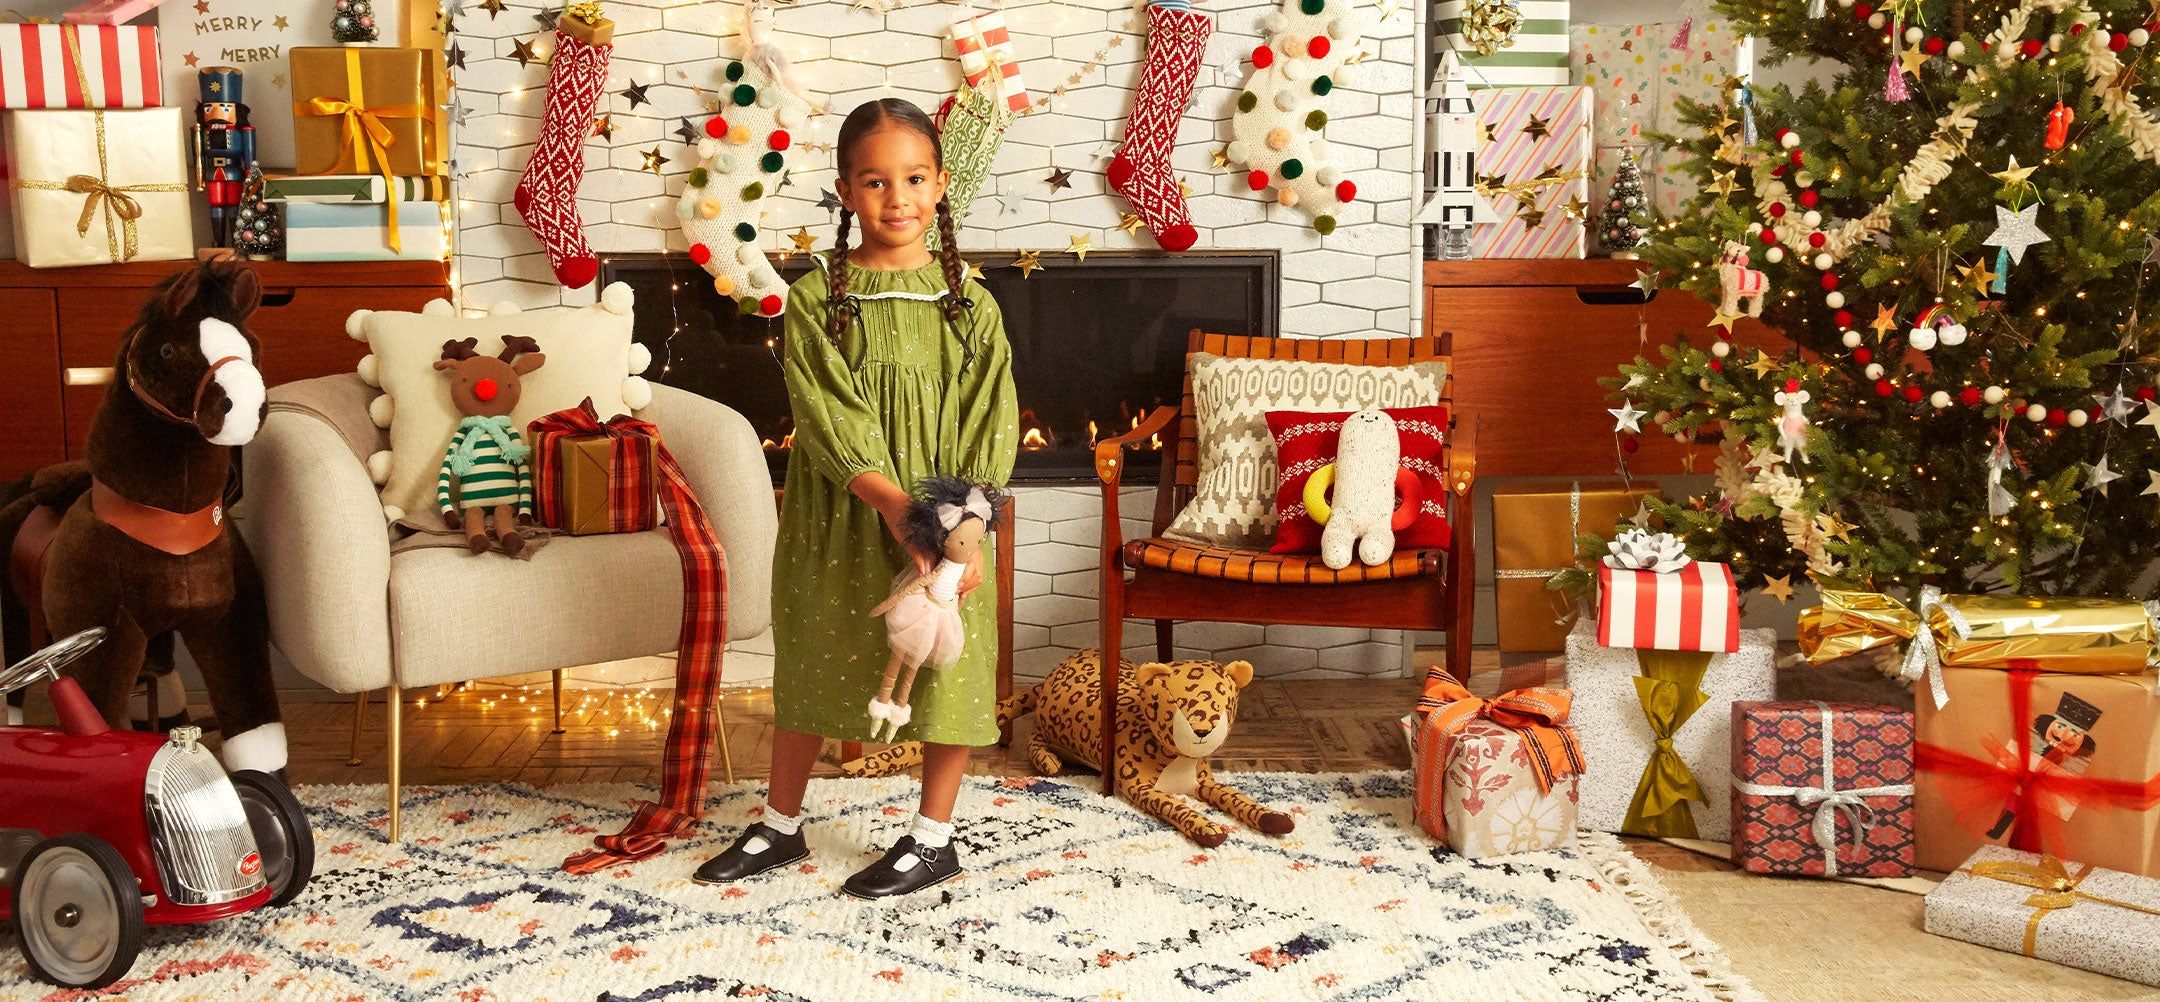 photo of a young girl dressed in a festive green dress. She is standing in a living room decorated with holiday decor and a christmas tree and surrounded by presents.